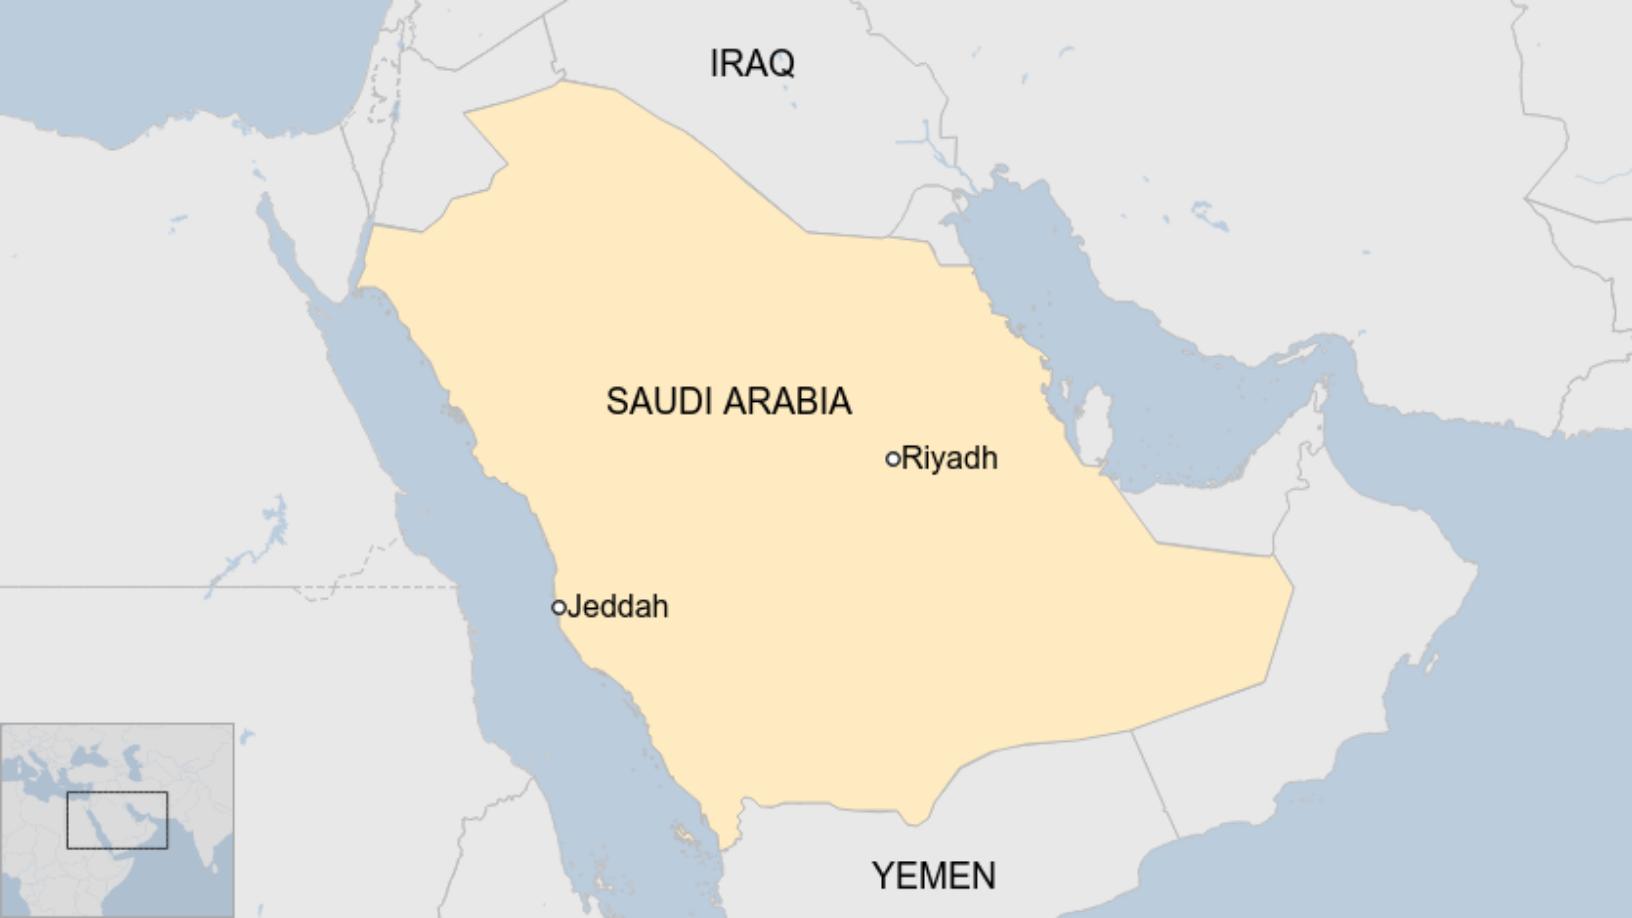 Explosion wounds several at ceremony commemorating WWI in Saudi Arabia